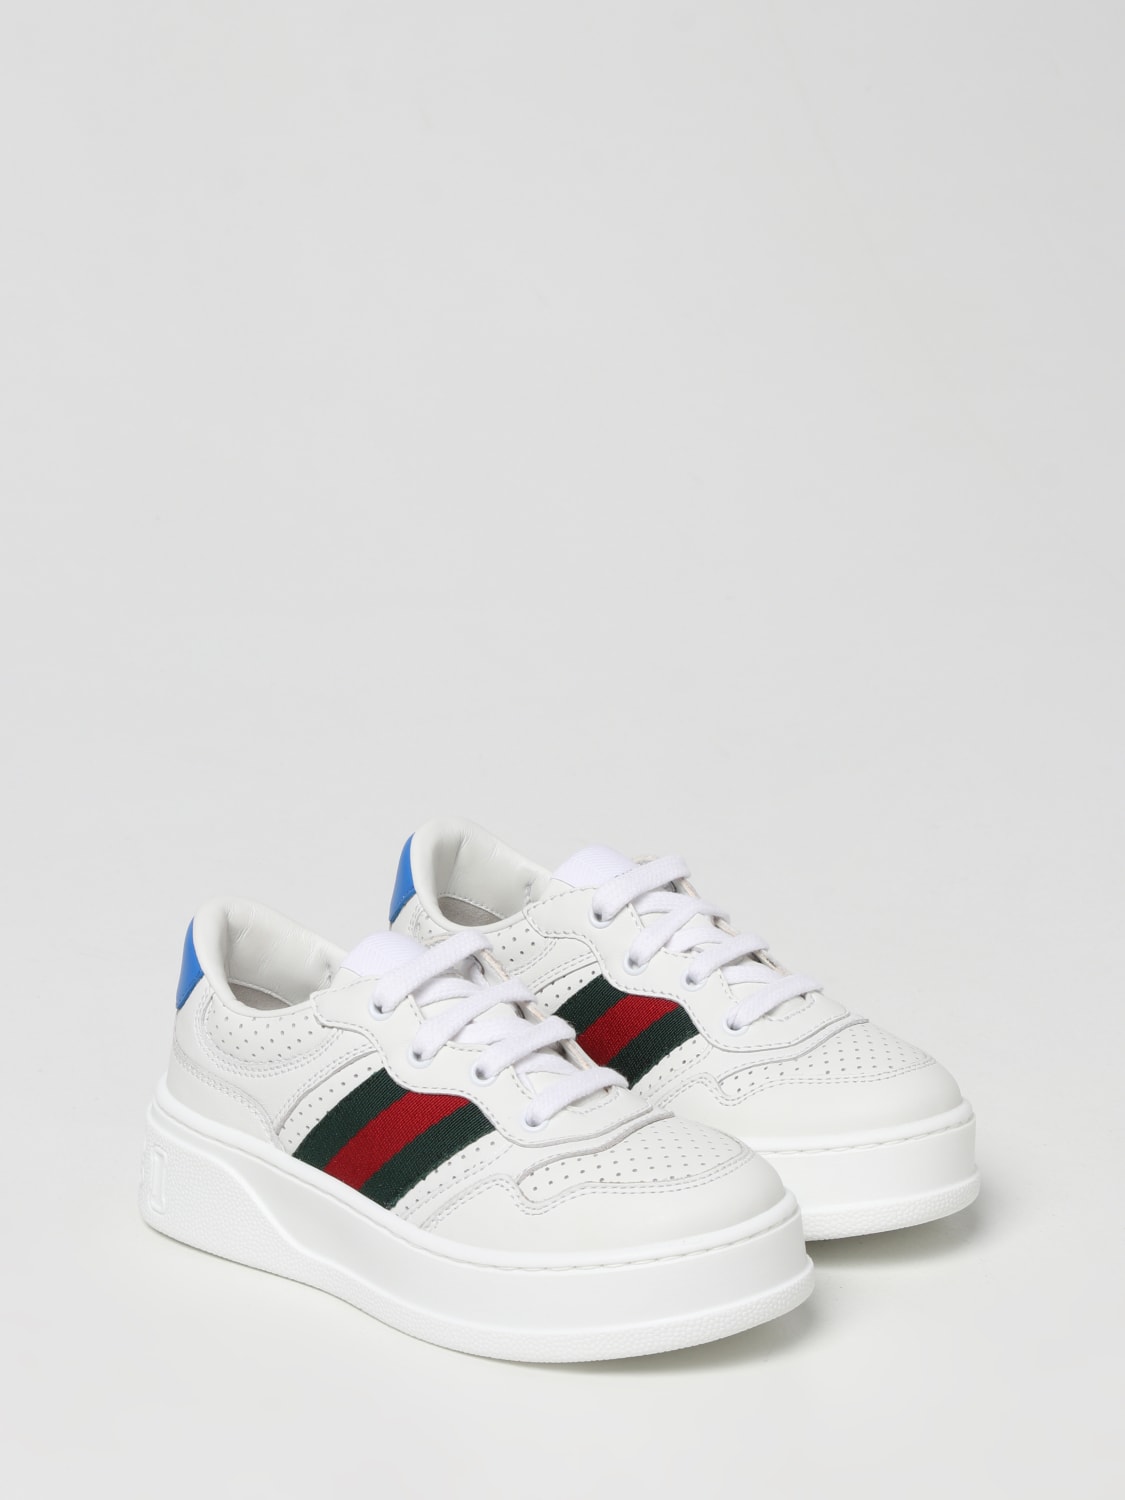 Umeki supplere forklædning GUCCI: Chunky smooth leather sneakers - White | Gucci shoes 702916UPG10  online at GIGLIO.COM